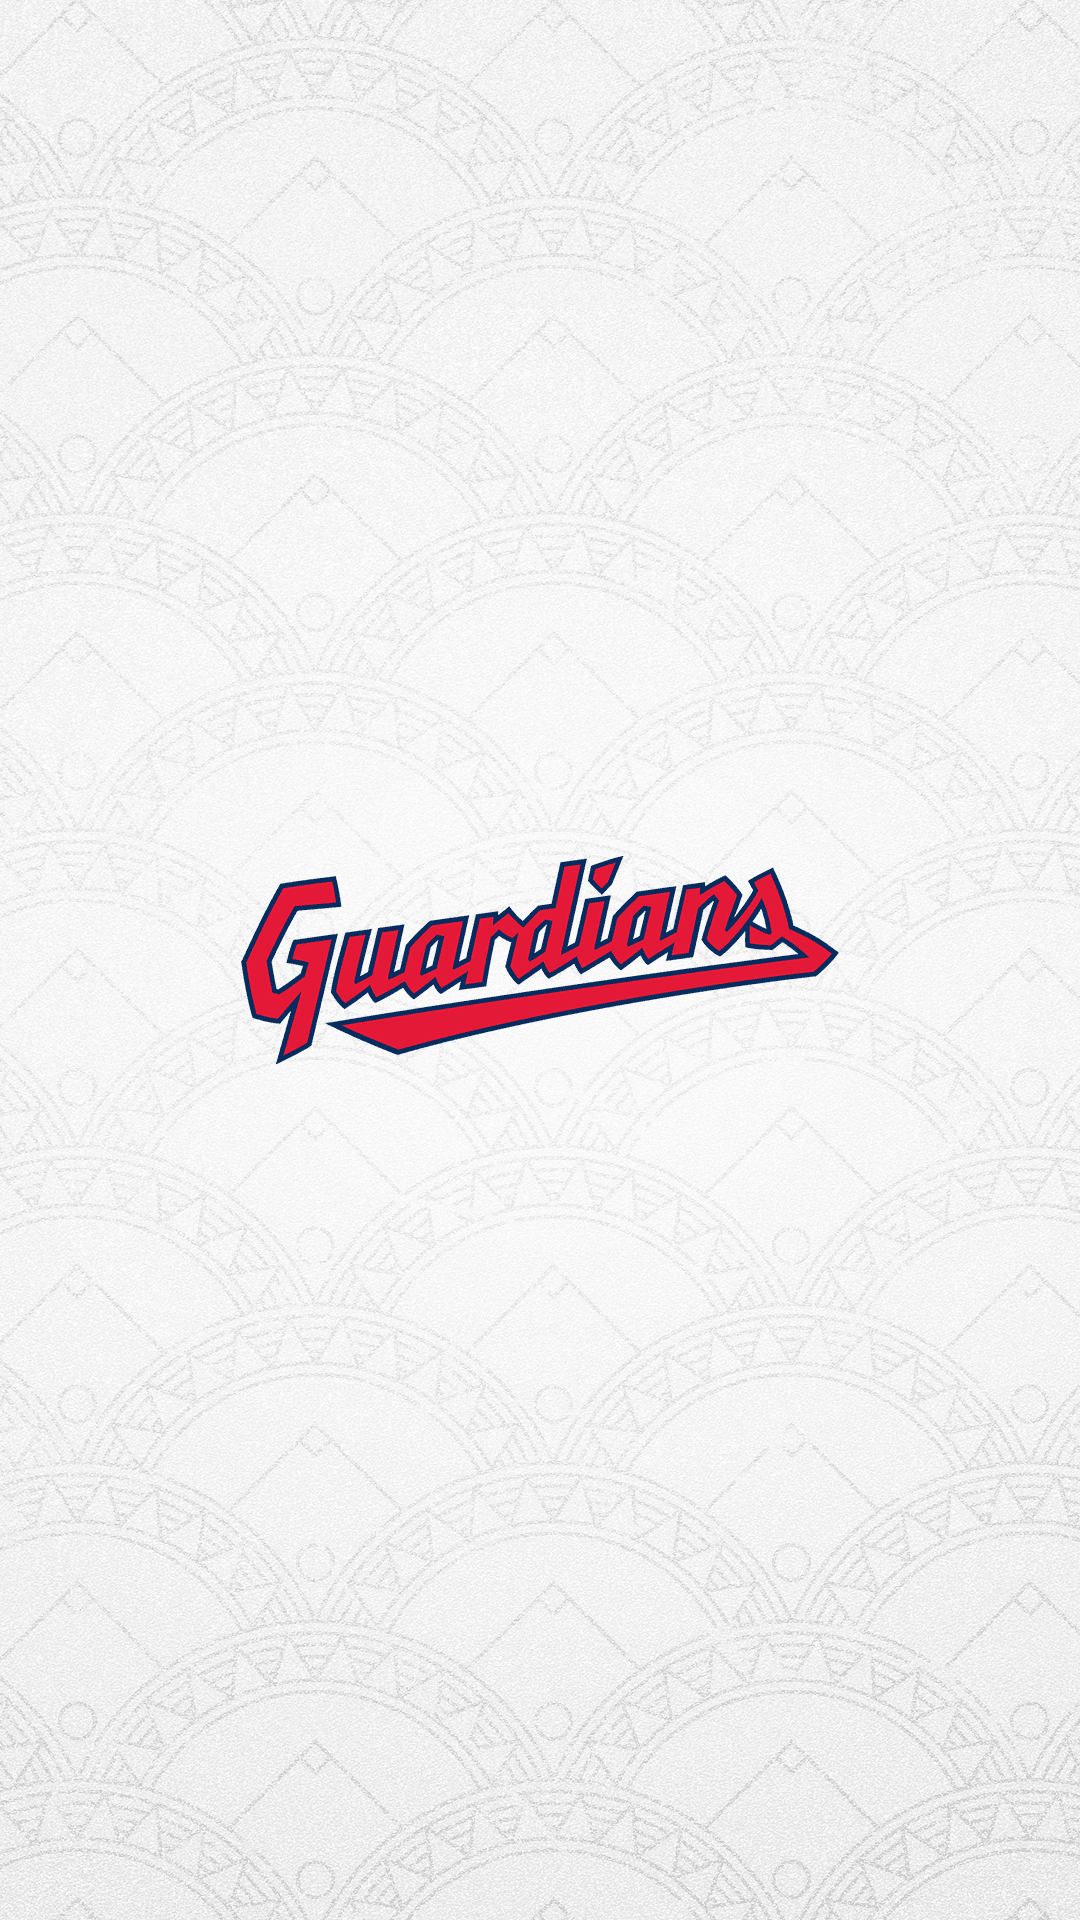 Cleveland Guardians Your White T Shirt, You Can't Get Barbecue Sauce On These Wallpaper. They Stay Permanently Clean